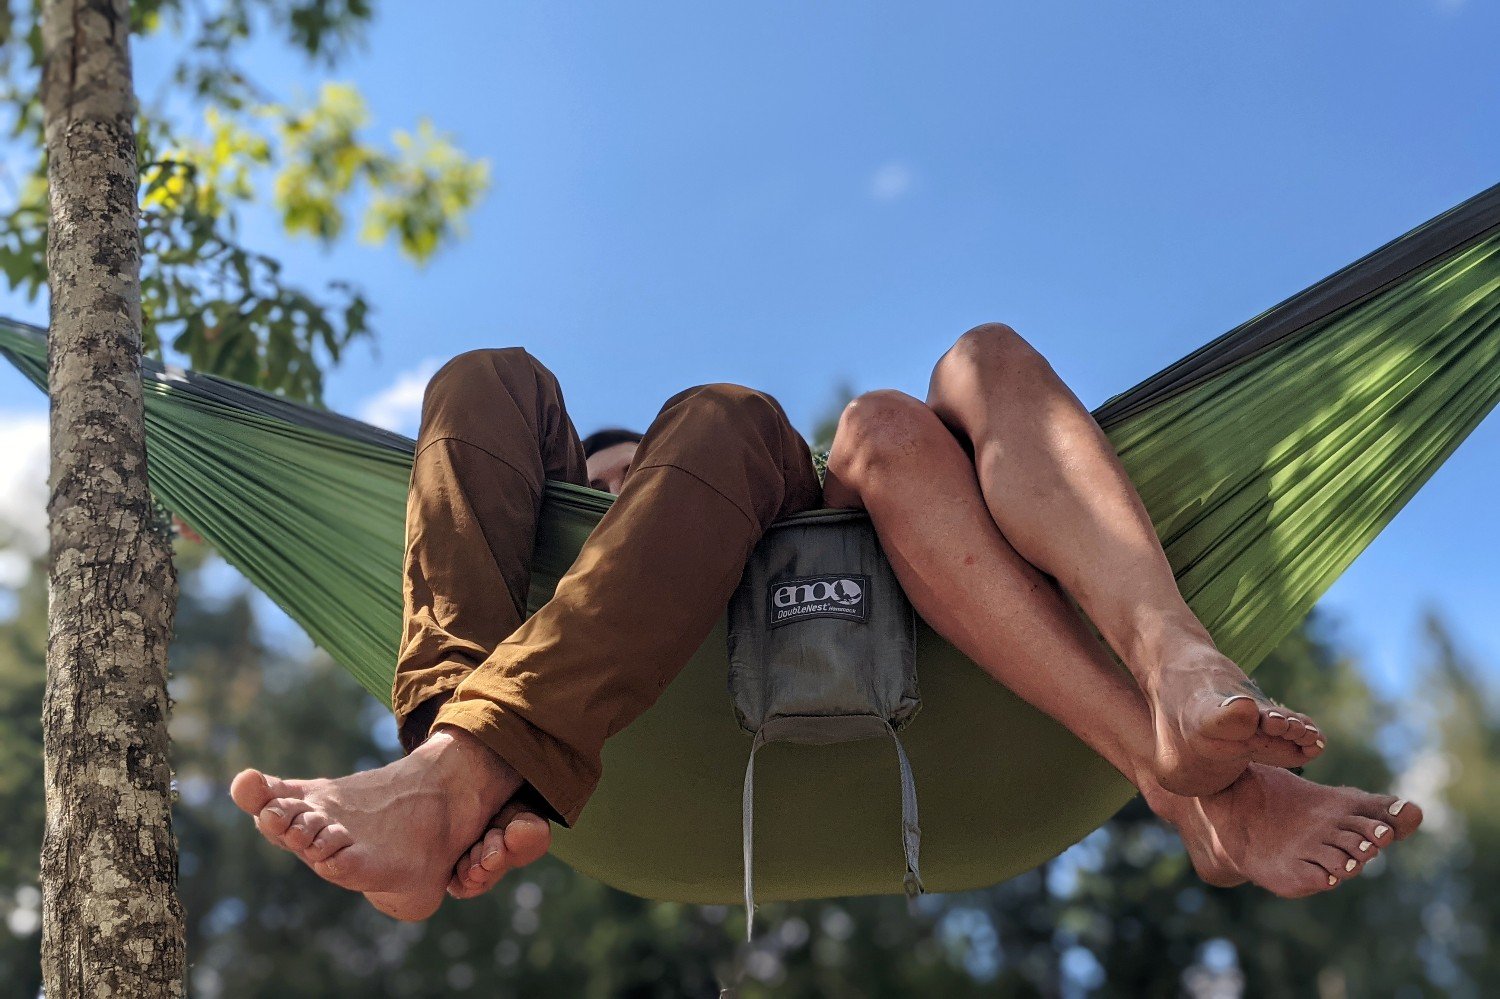 A view from below of two peoples feet hanging over the edge of the ENO Doublenest hammock